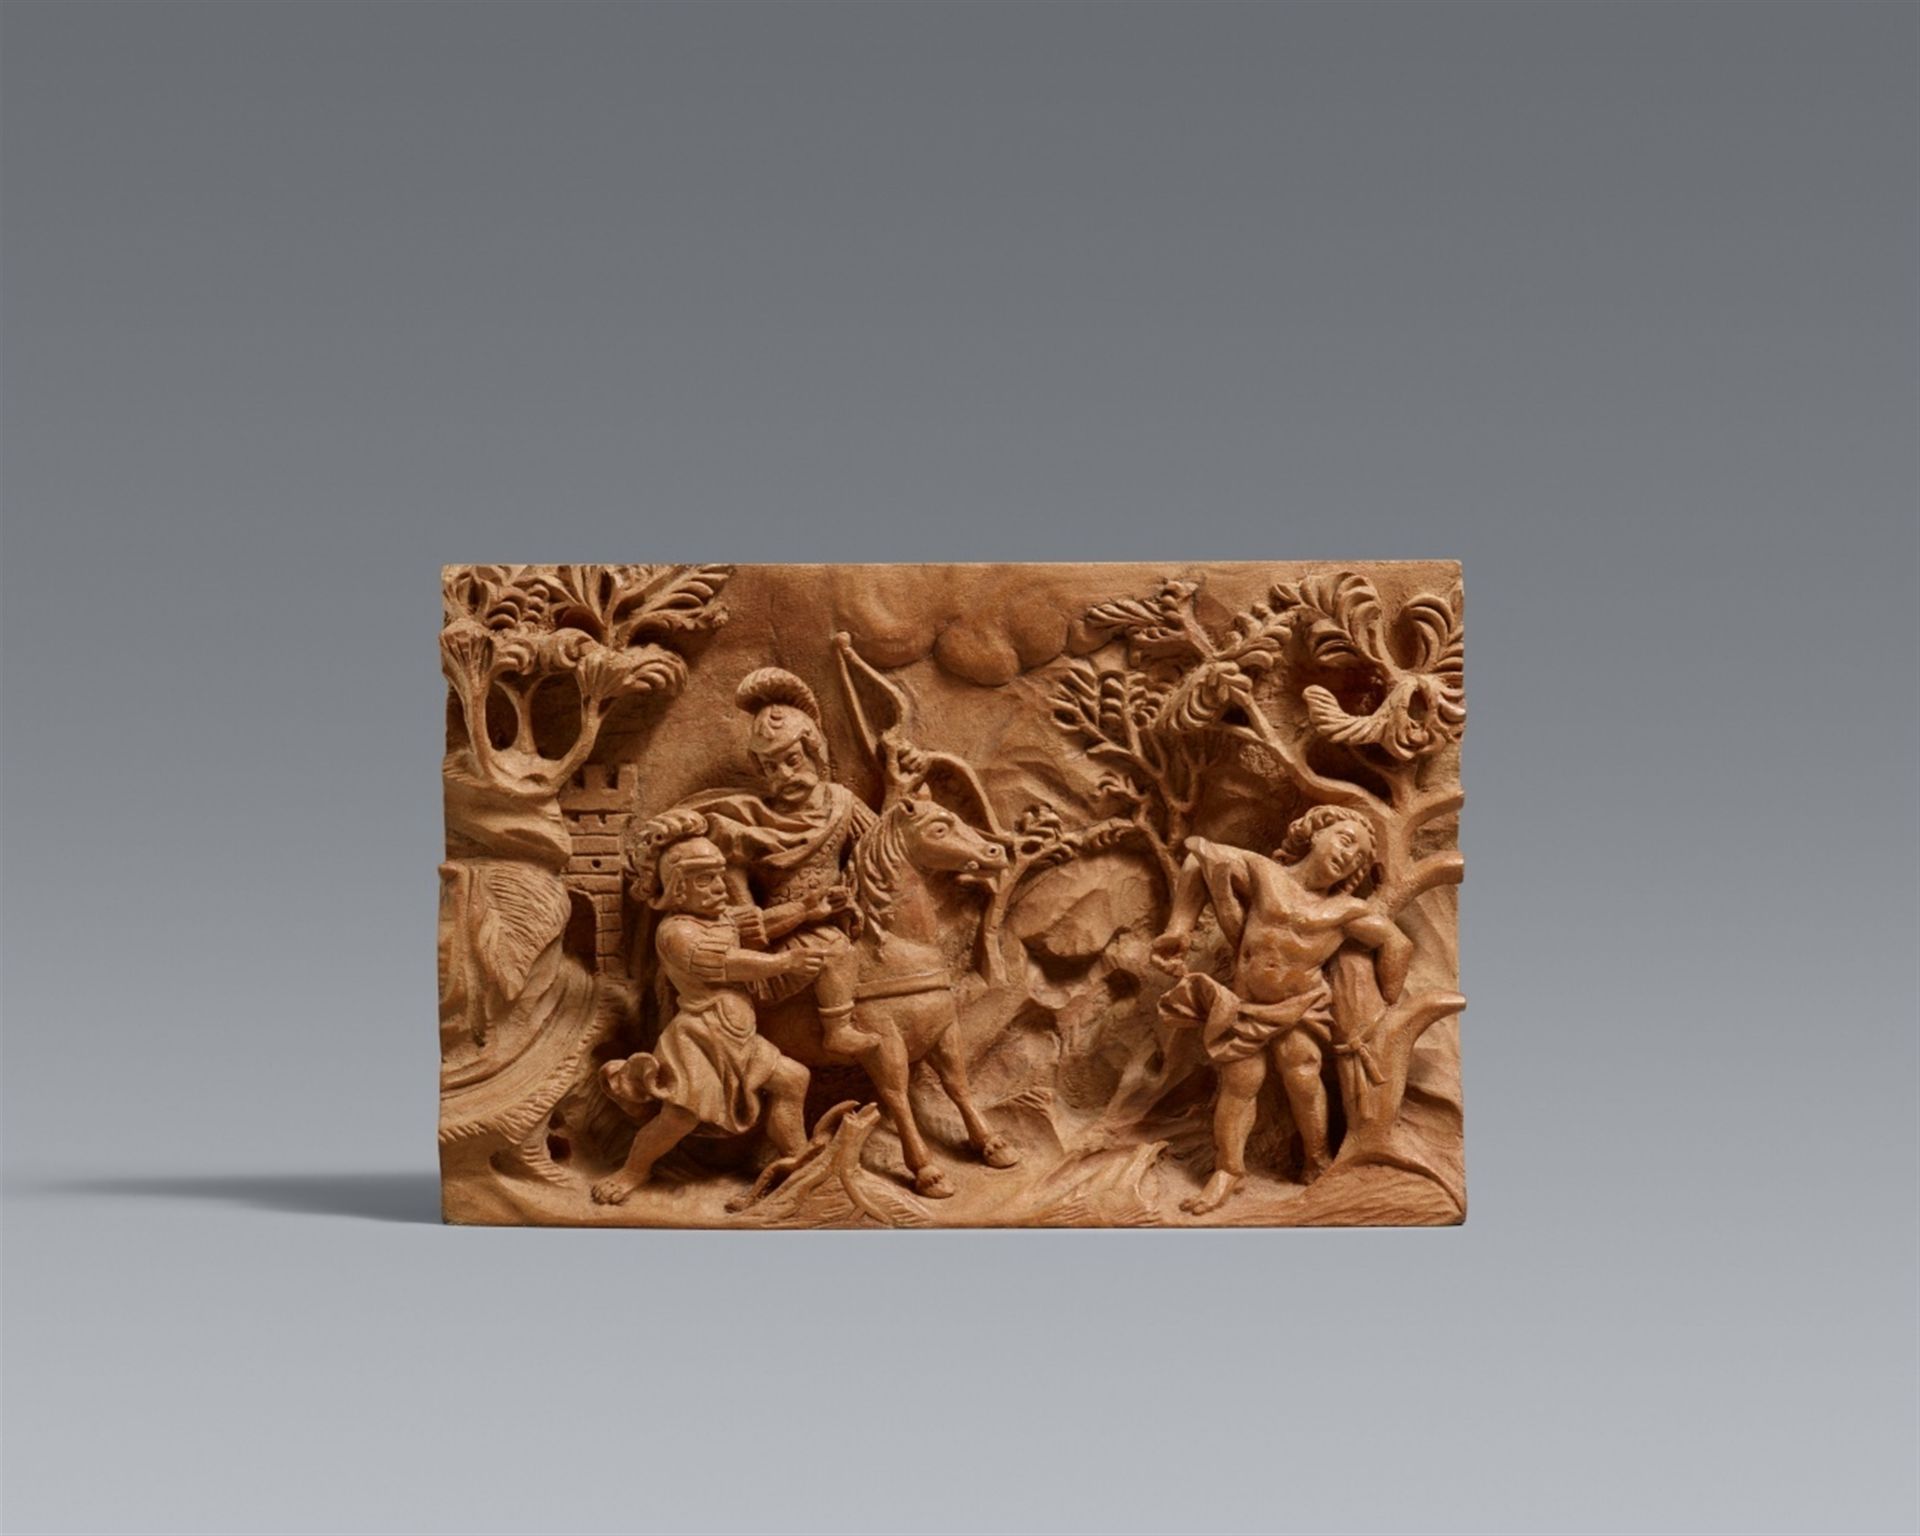 An early 18th century South German carved boxwood relief with the Martyrdom of Saint Sebastian